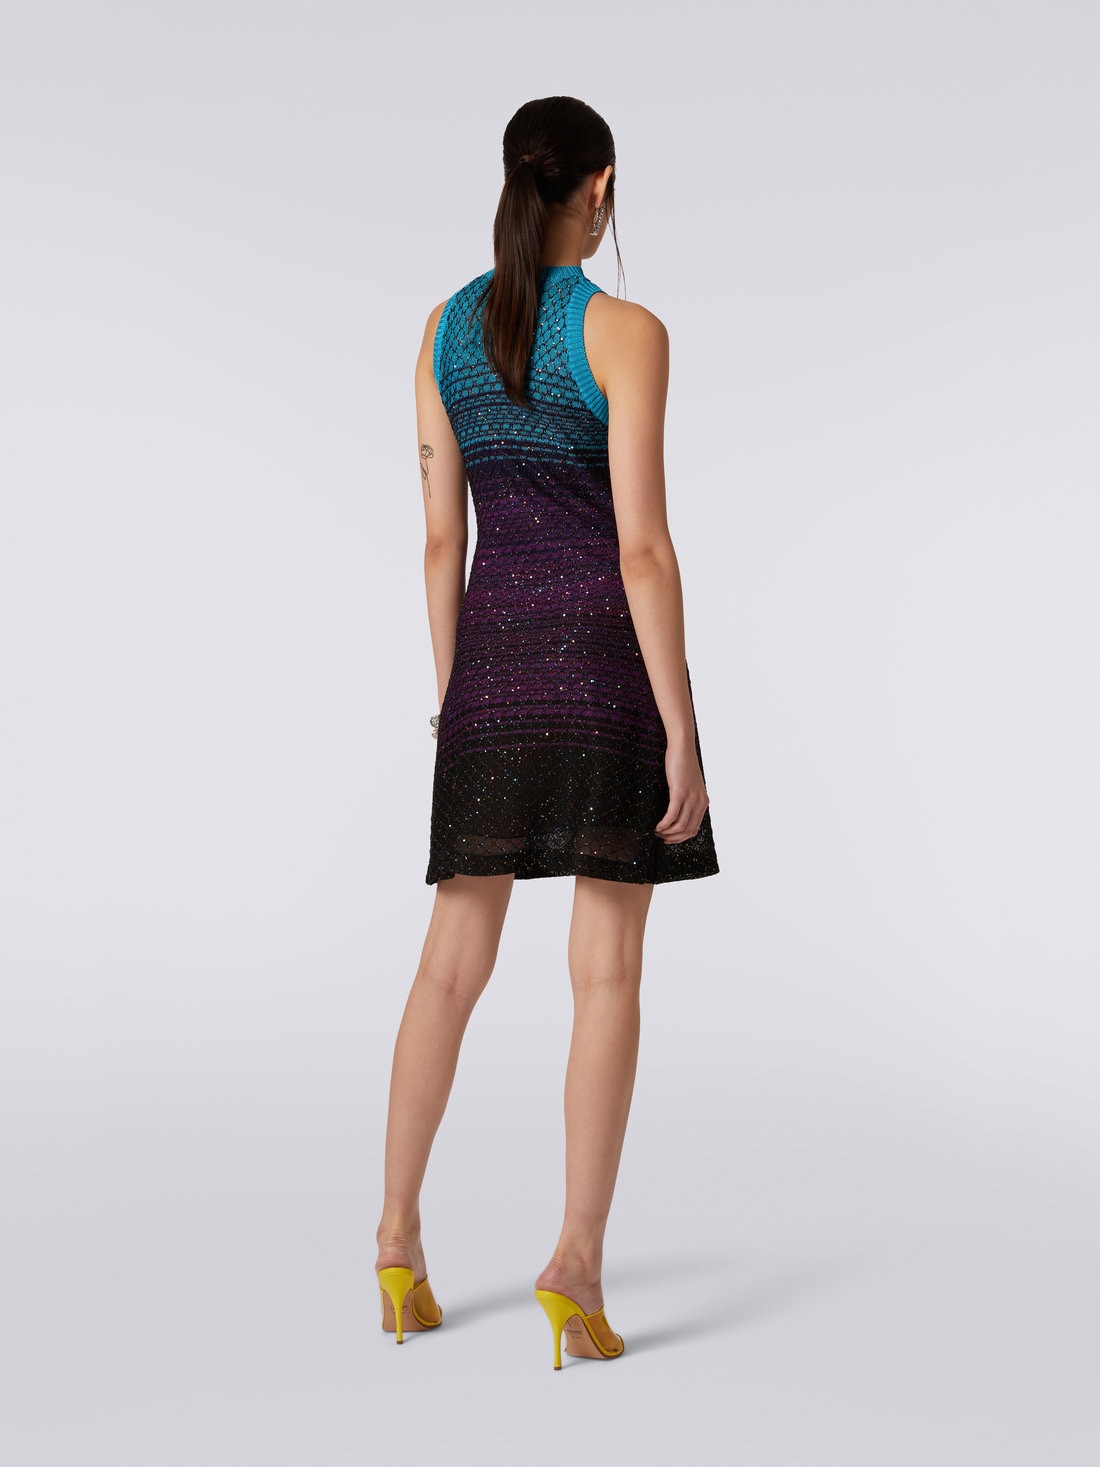 Sleeveless mesh dress with sequins, Turquoise, Purple & Black - DS23SG28BK022ISM8NJ - 3